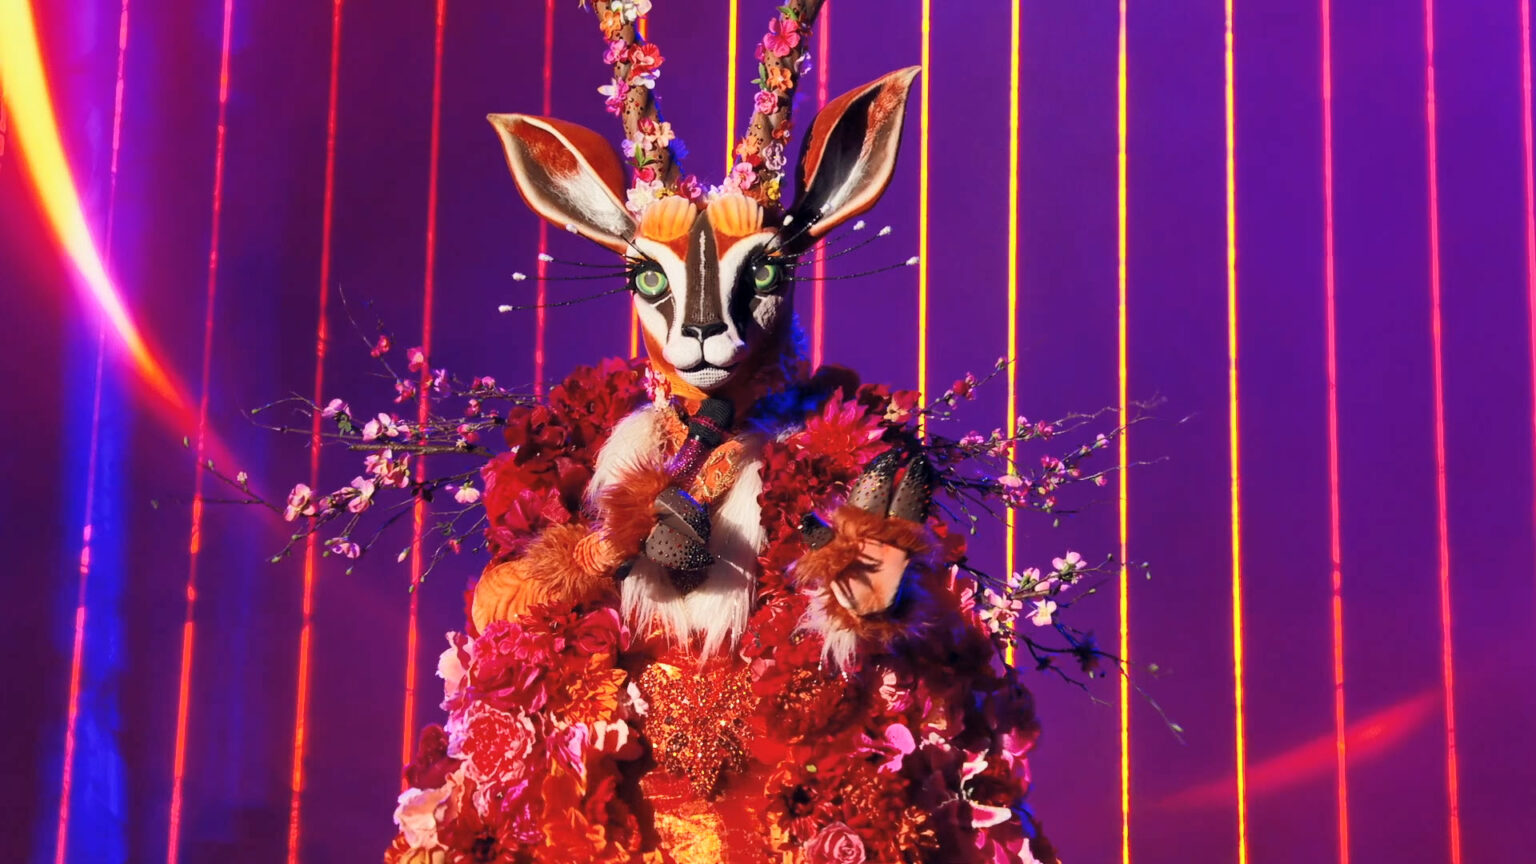 The Masked Singer 10 Preview Who is Gazelle?